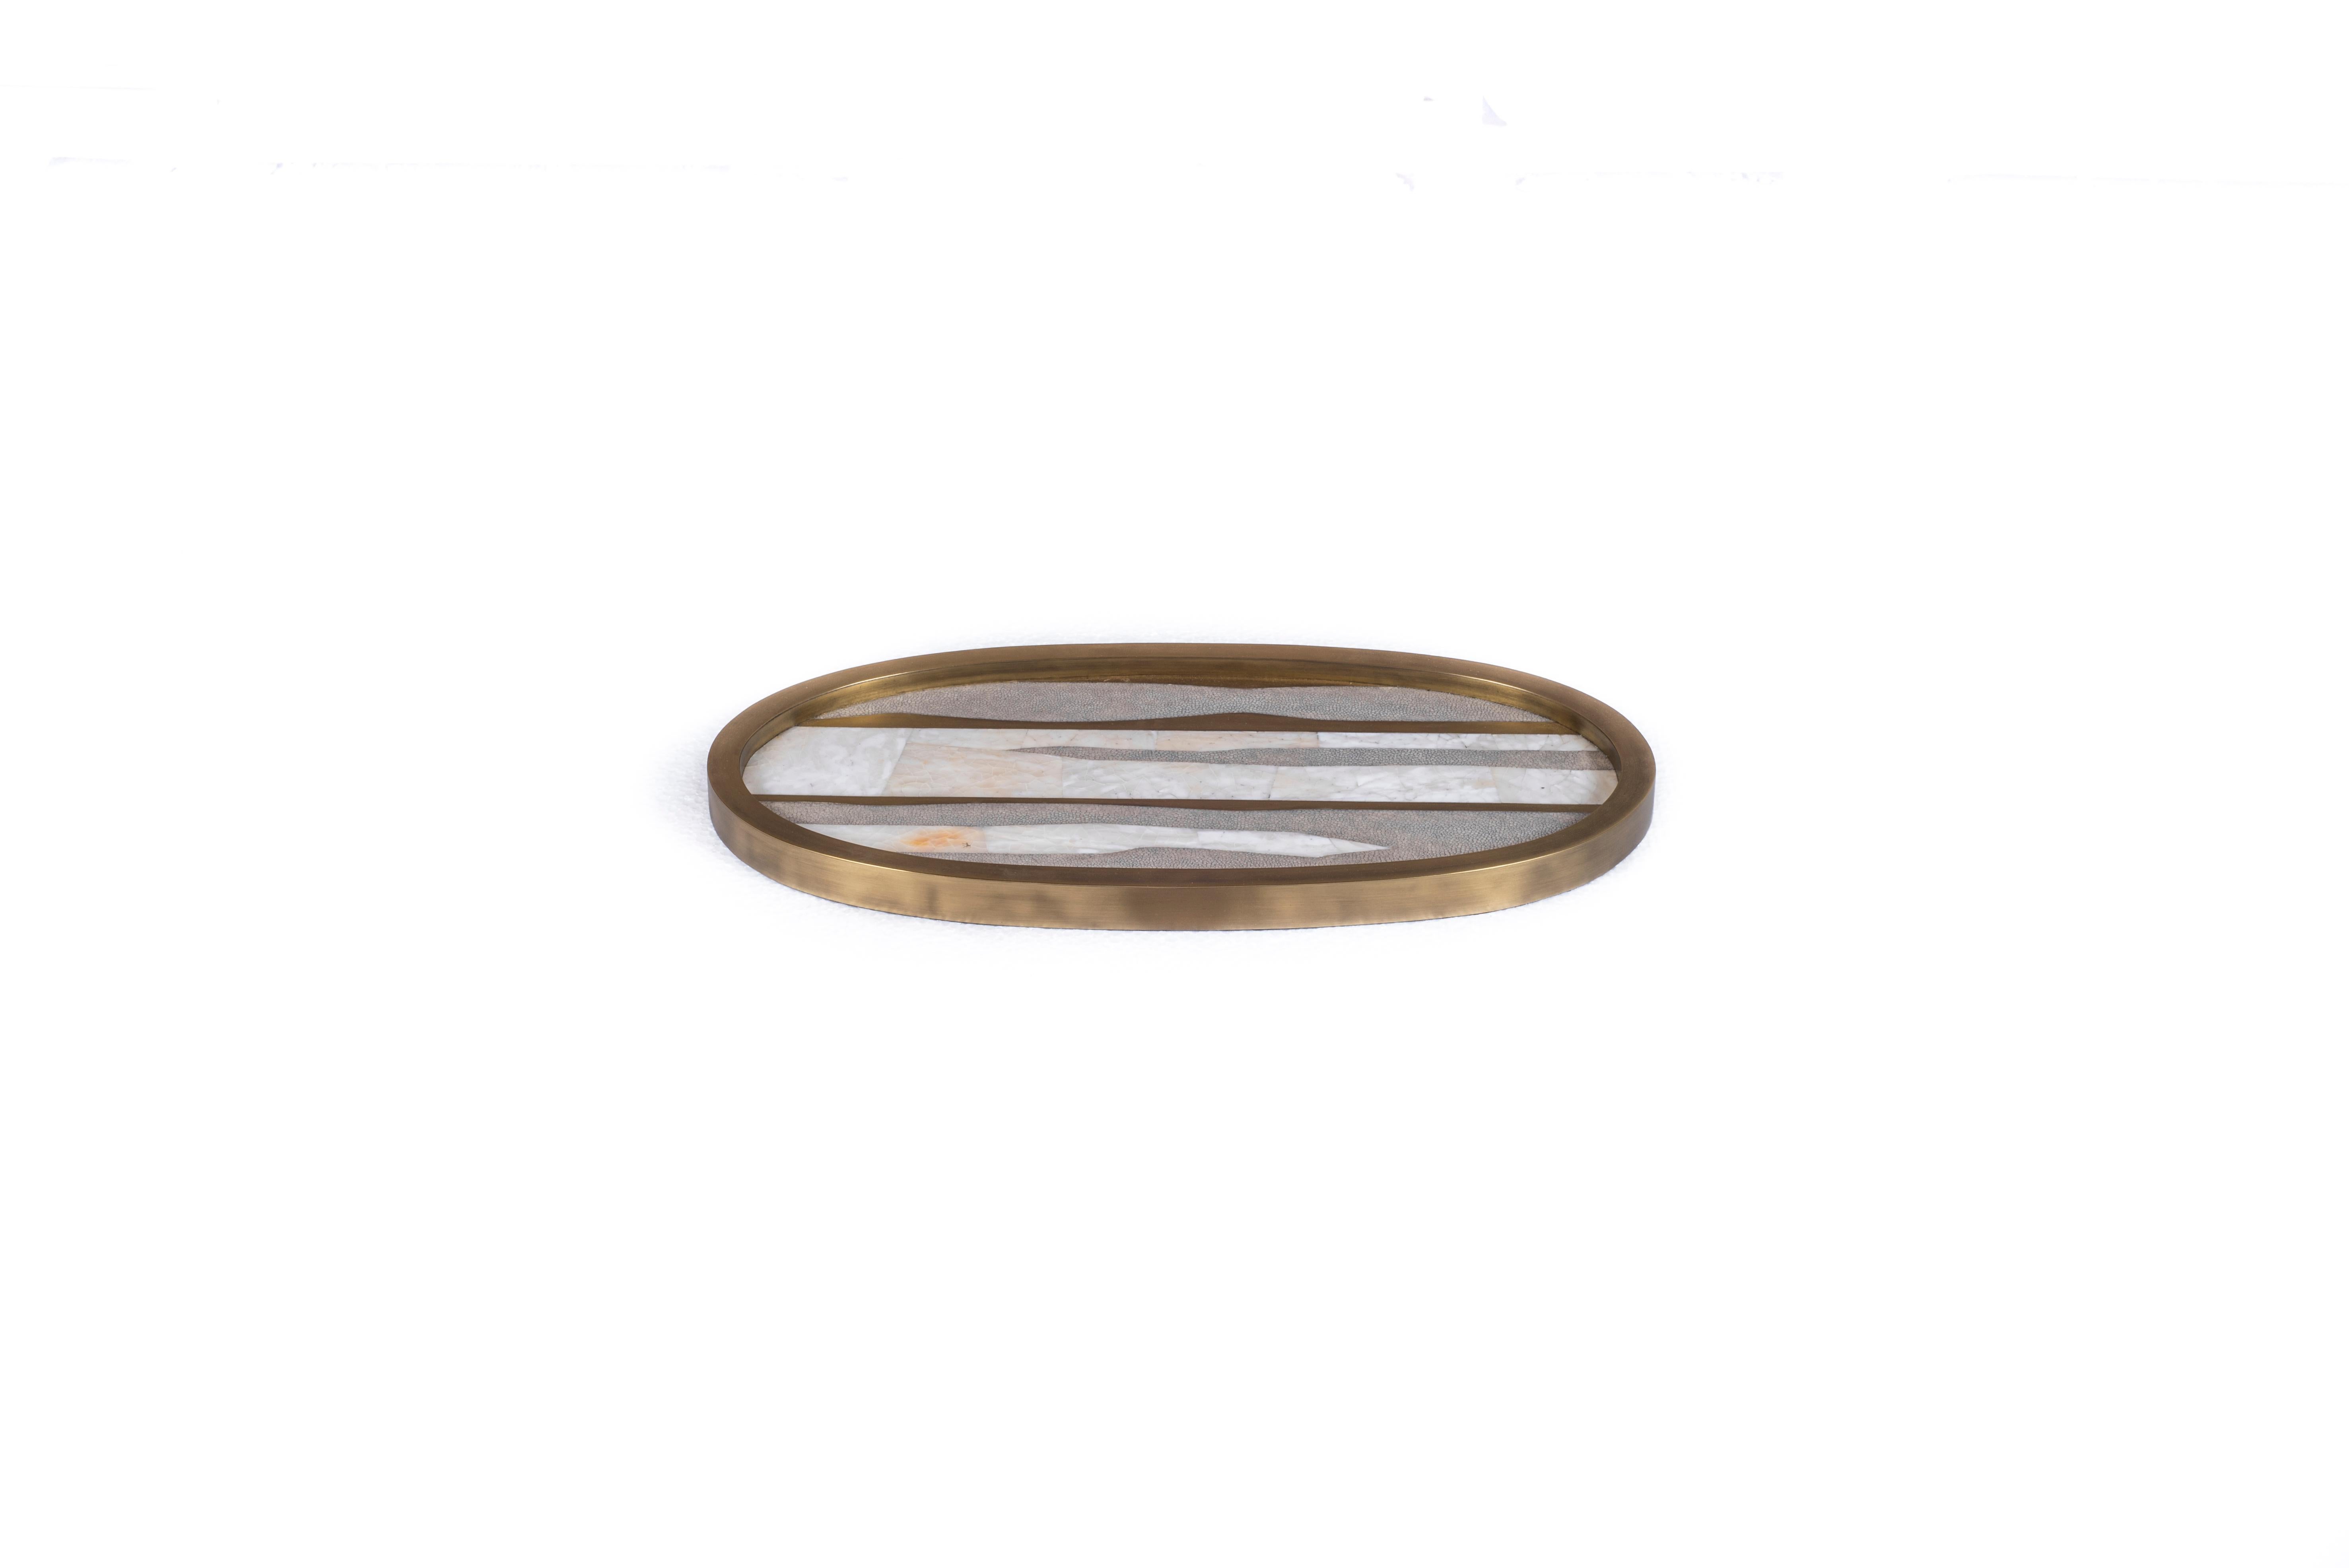 Art Deco Shagreen Tray with Mix Inlay Pattern including Shell and Brass by Kifu, Paris